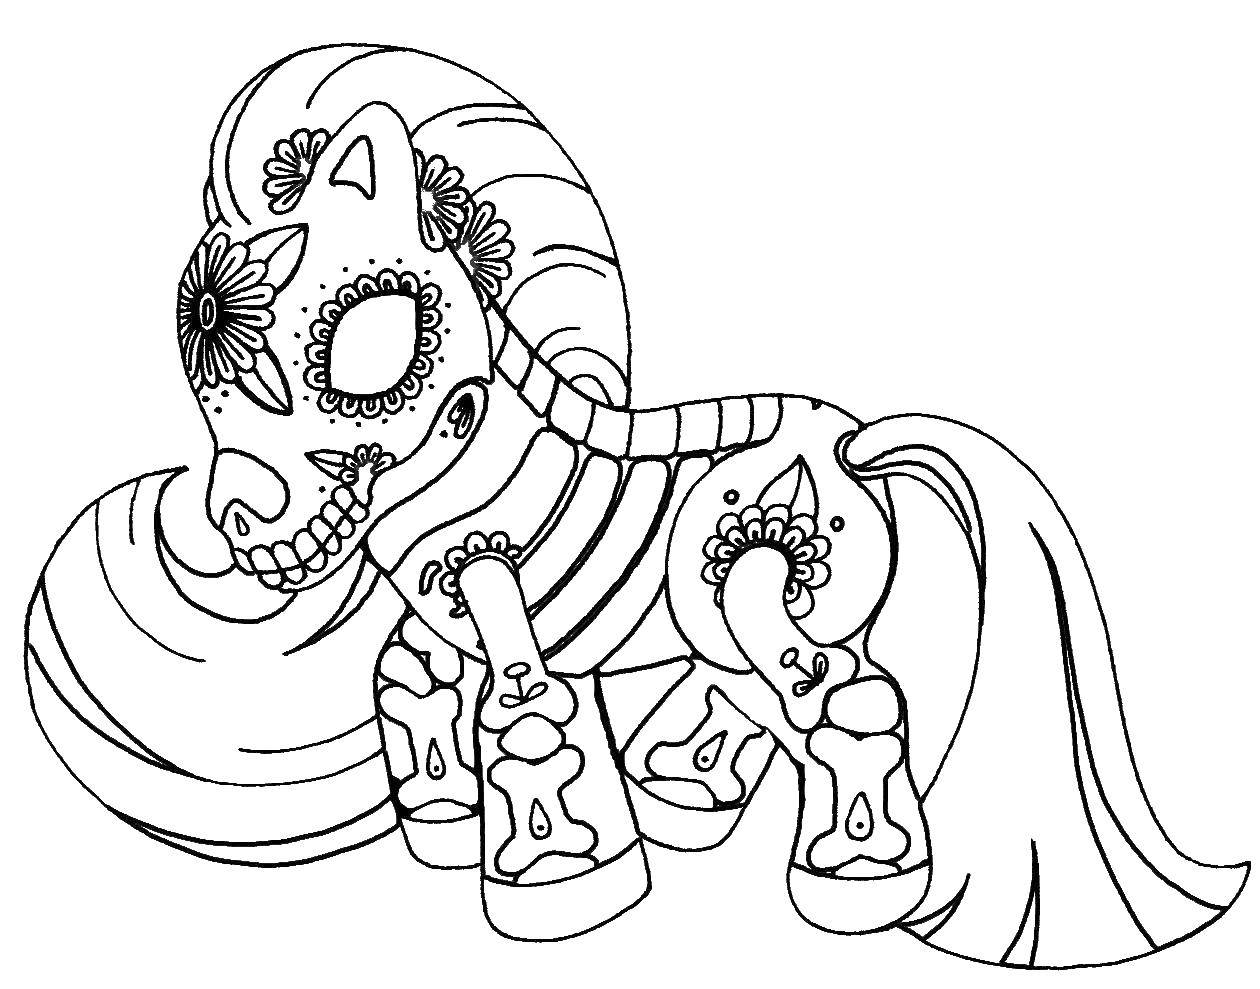 Coloring Ponies from my little pony in the patterns. Category patterns. Tags:  Pony, My little pony .